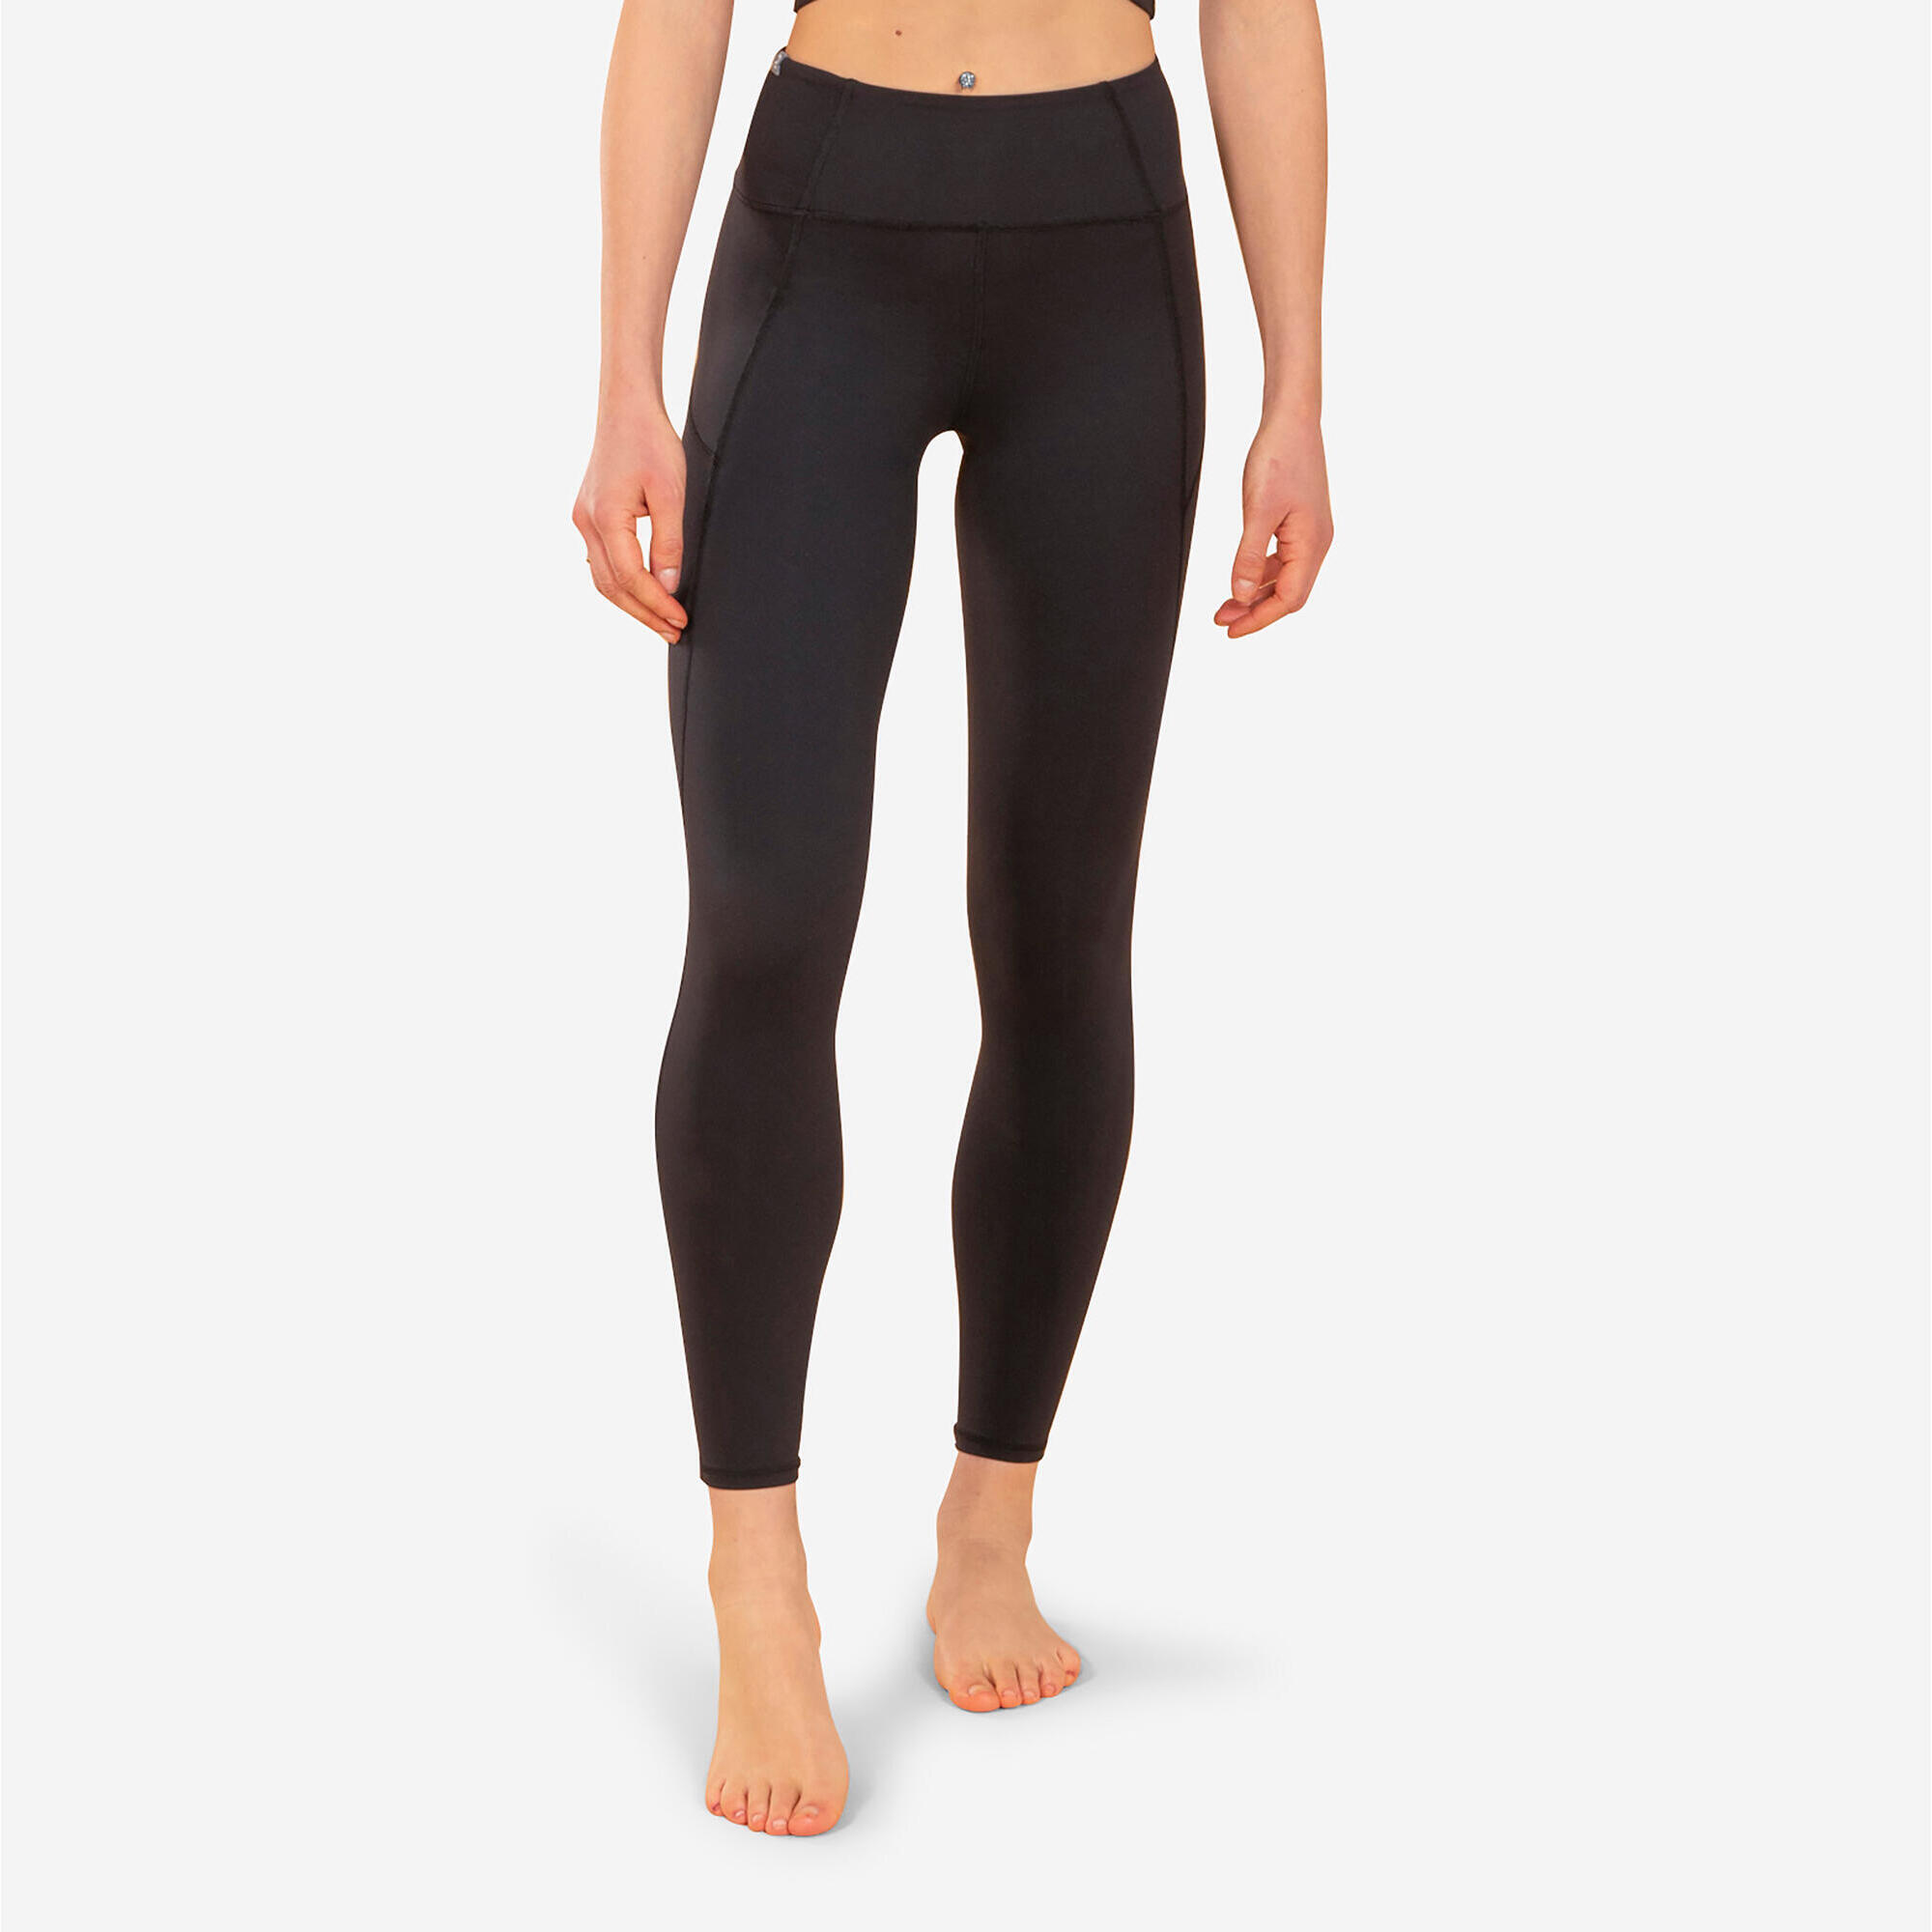 Adidas Tights  Shop for Adidas Tight Online in India  Myntra